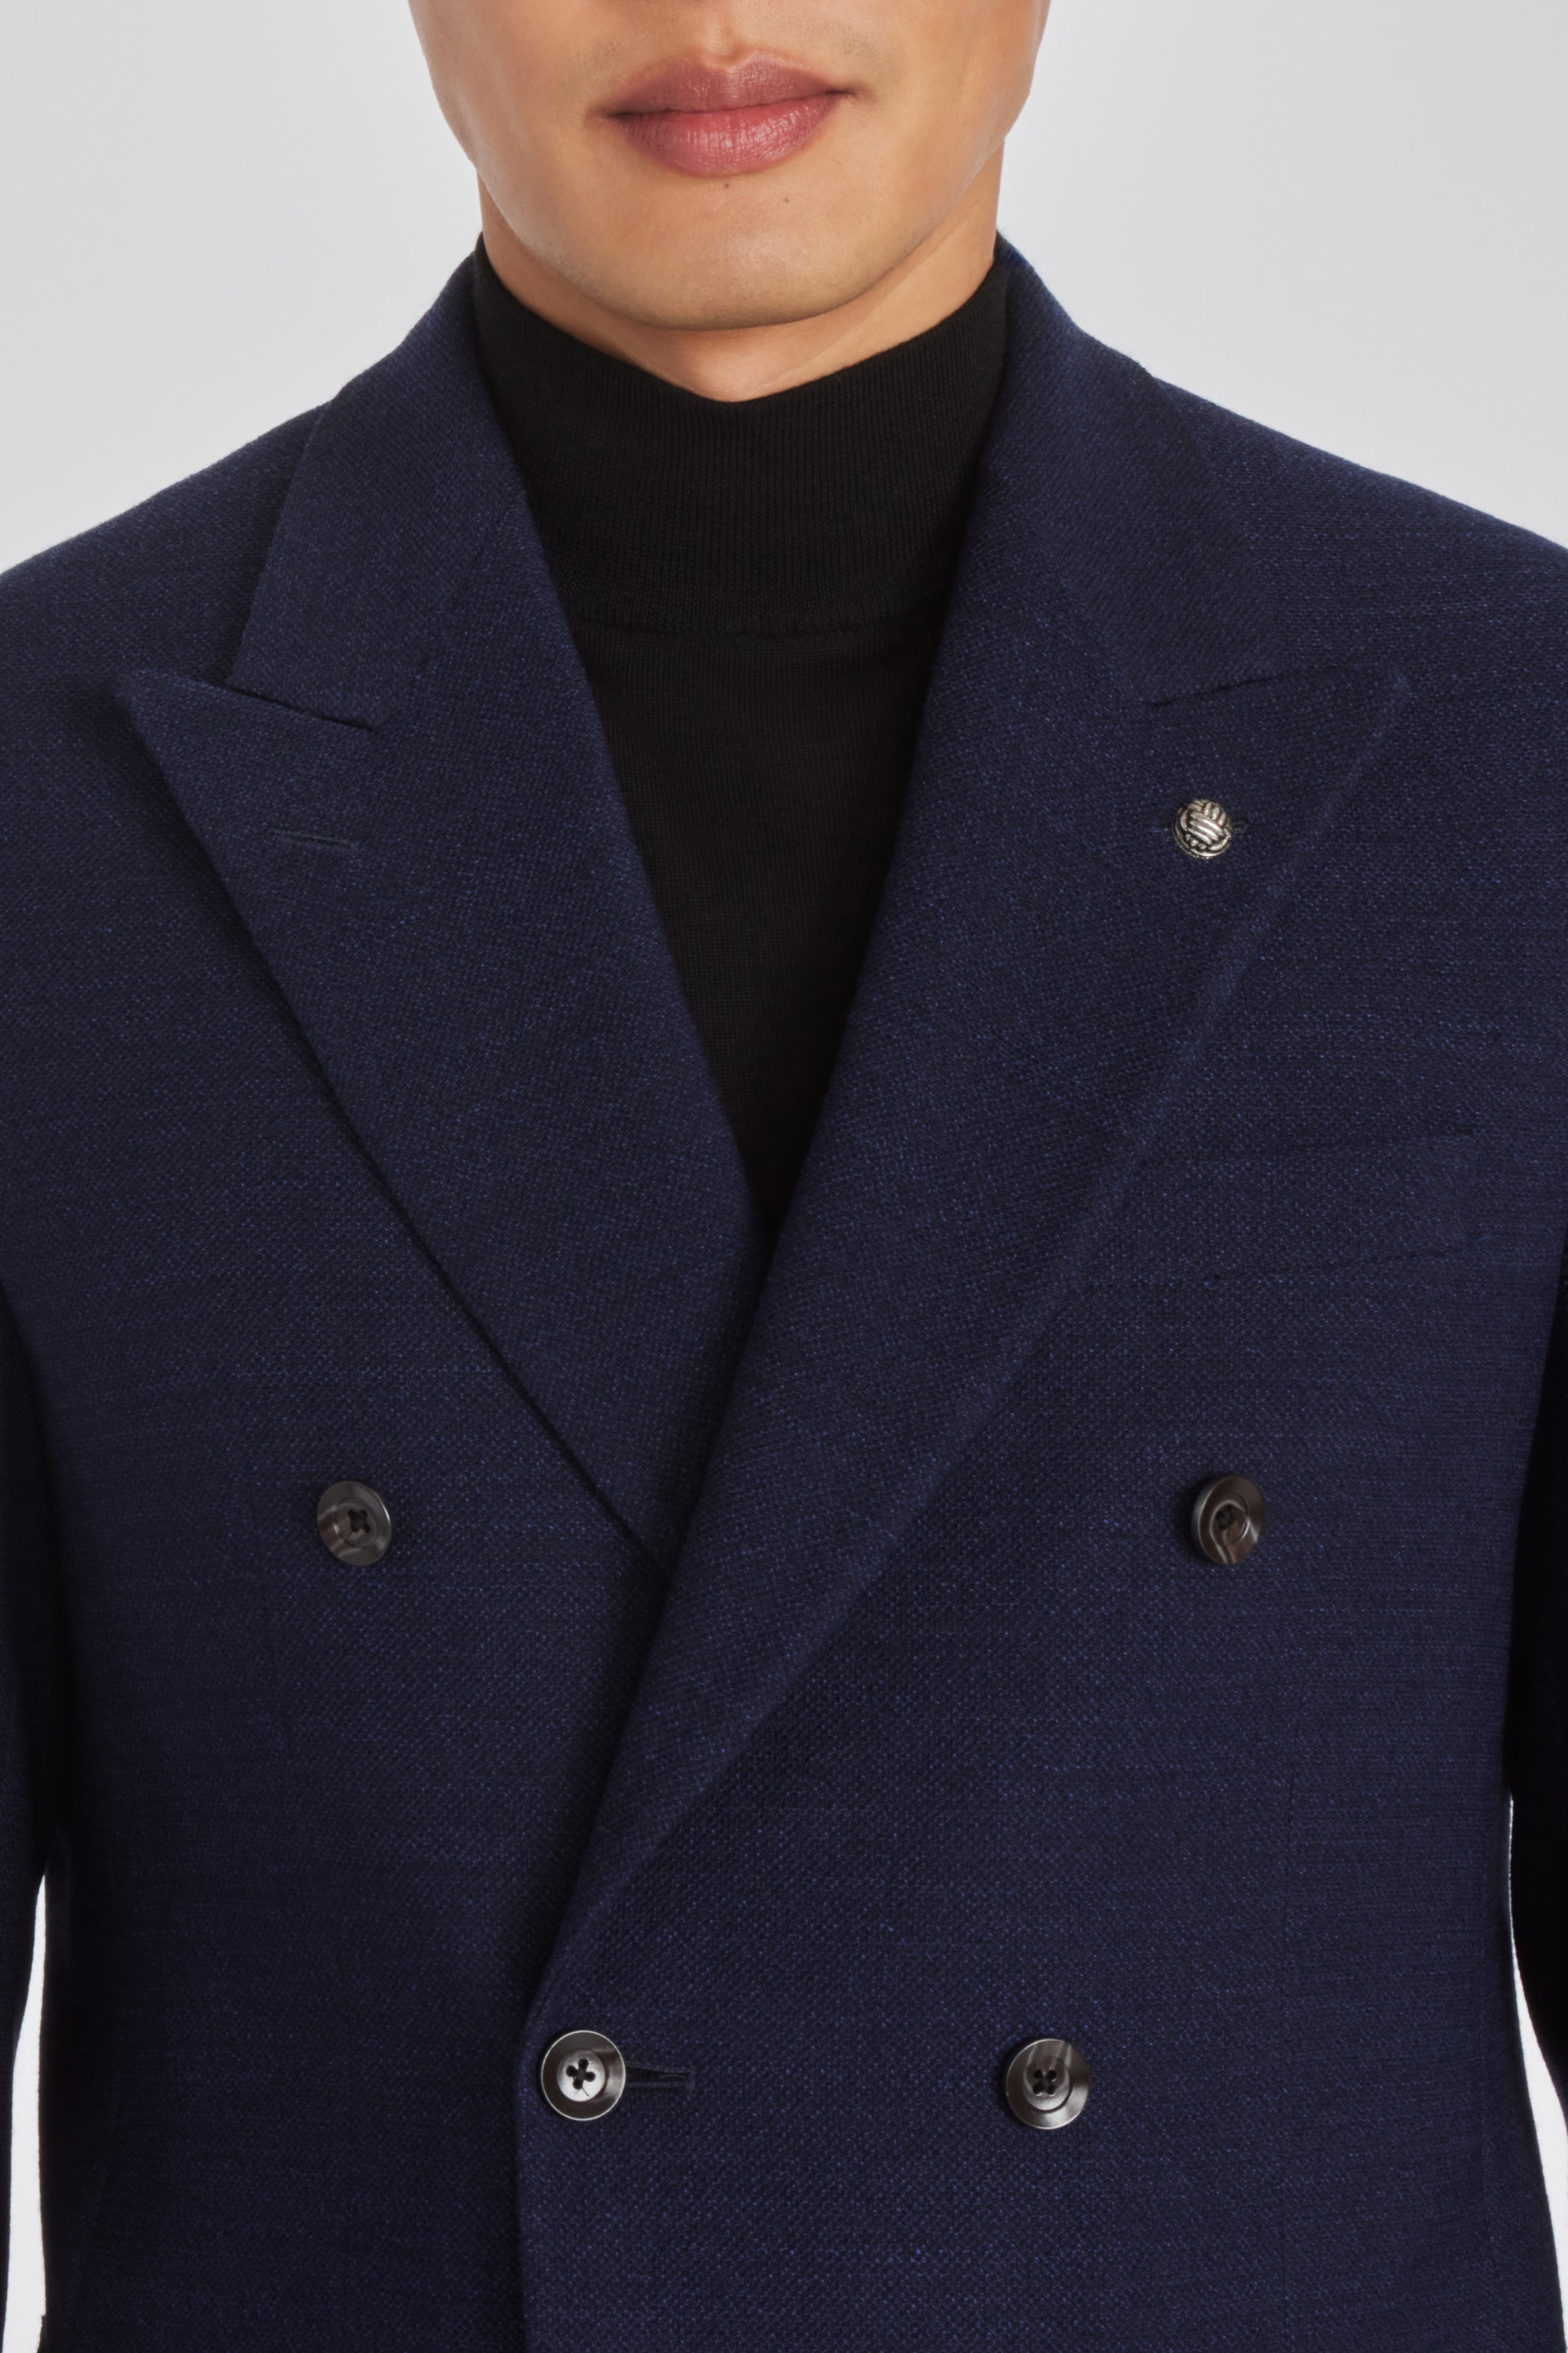 Hill Navy Solid Wool and Lycra Blazer